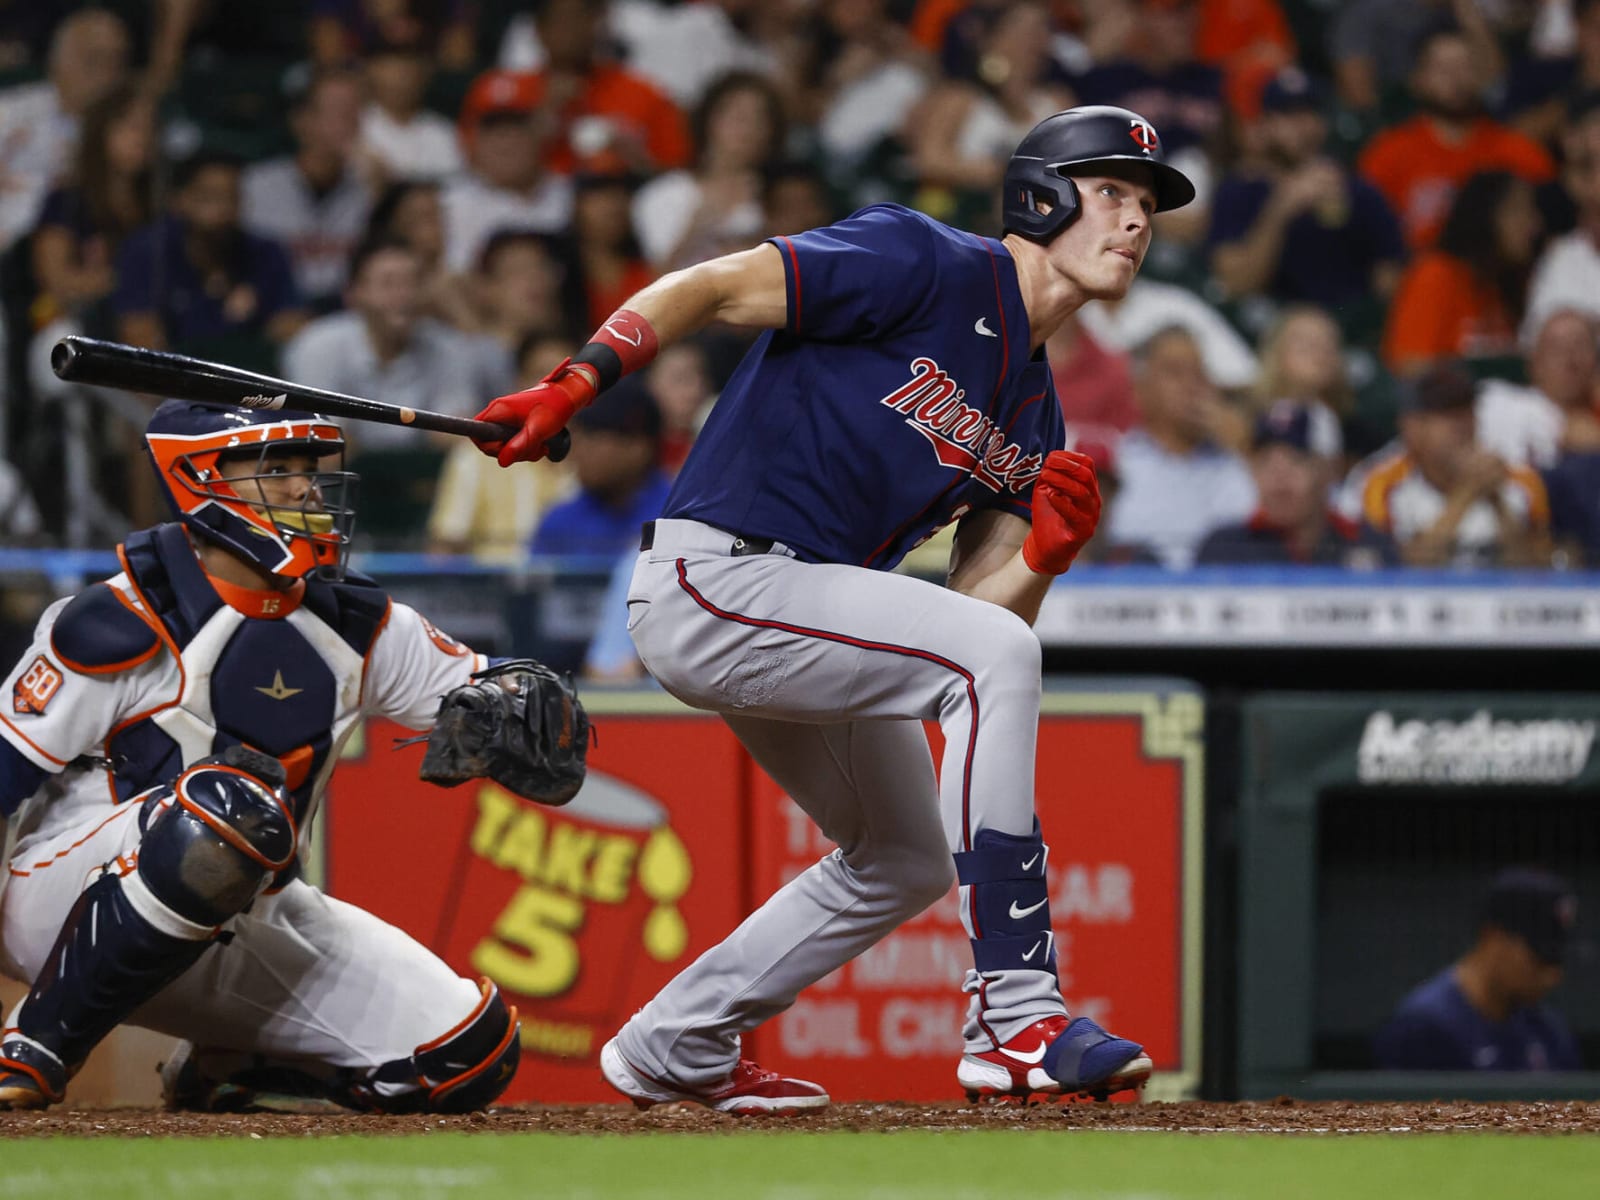 Max Kepler 3rd Home Run of the Season #Twins #MLB Distance: 378ft Exit  Velocity: 110 MPH Launch Angle: 18°